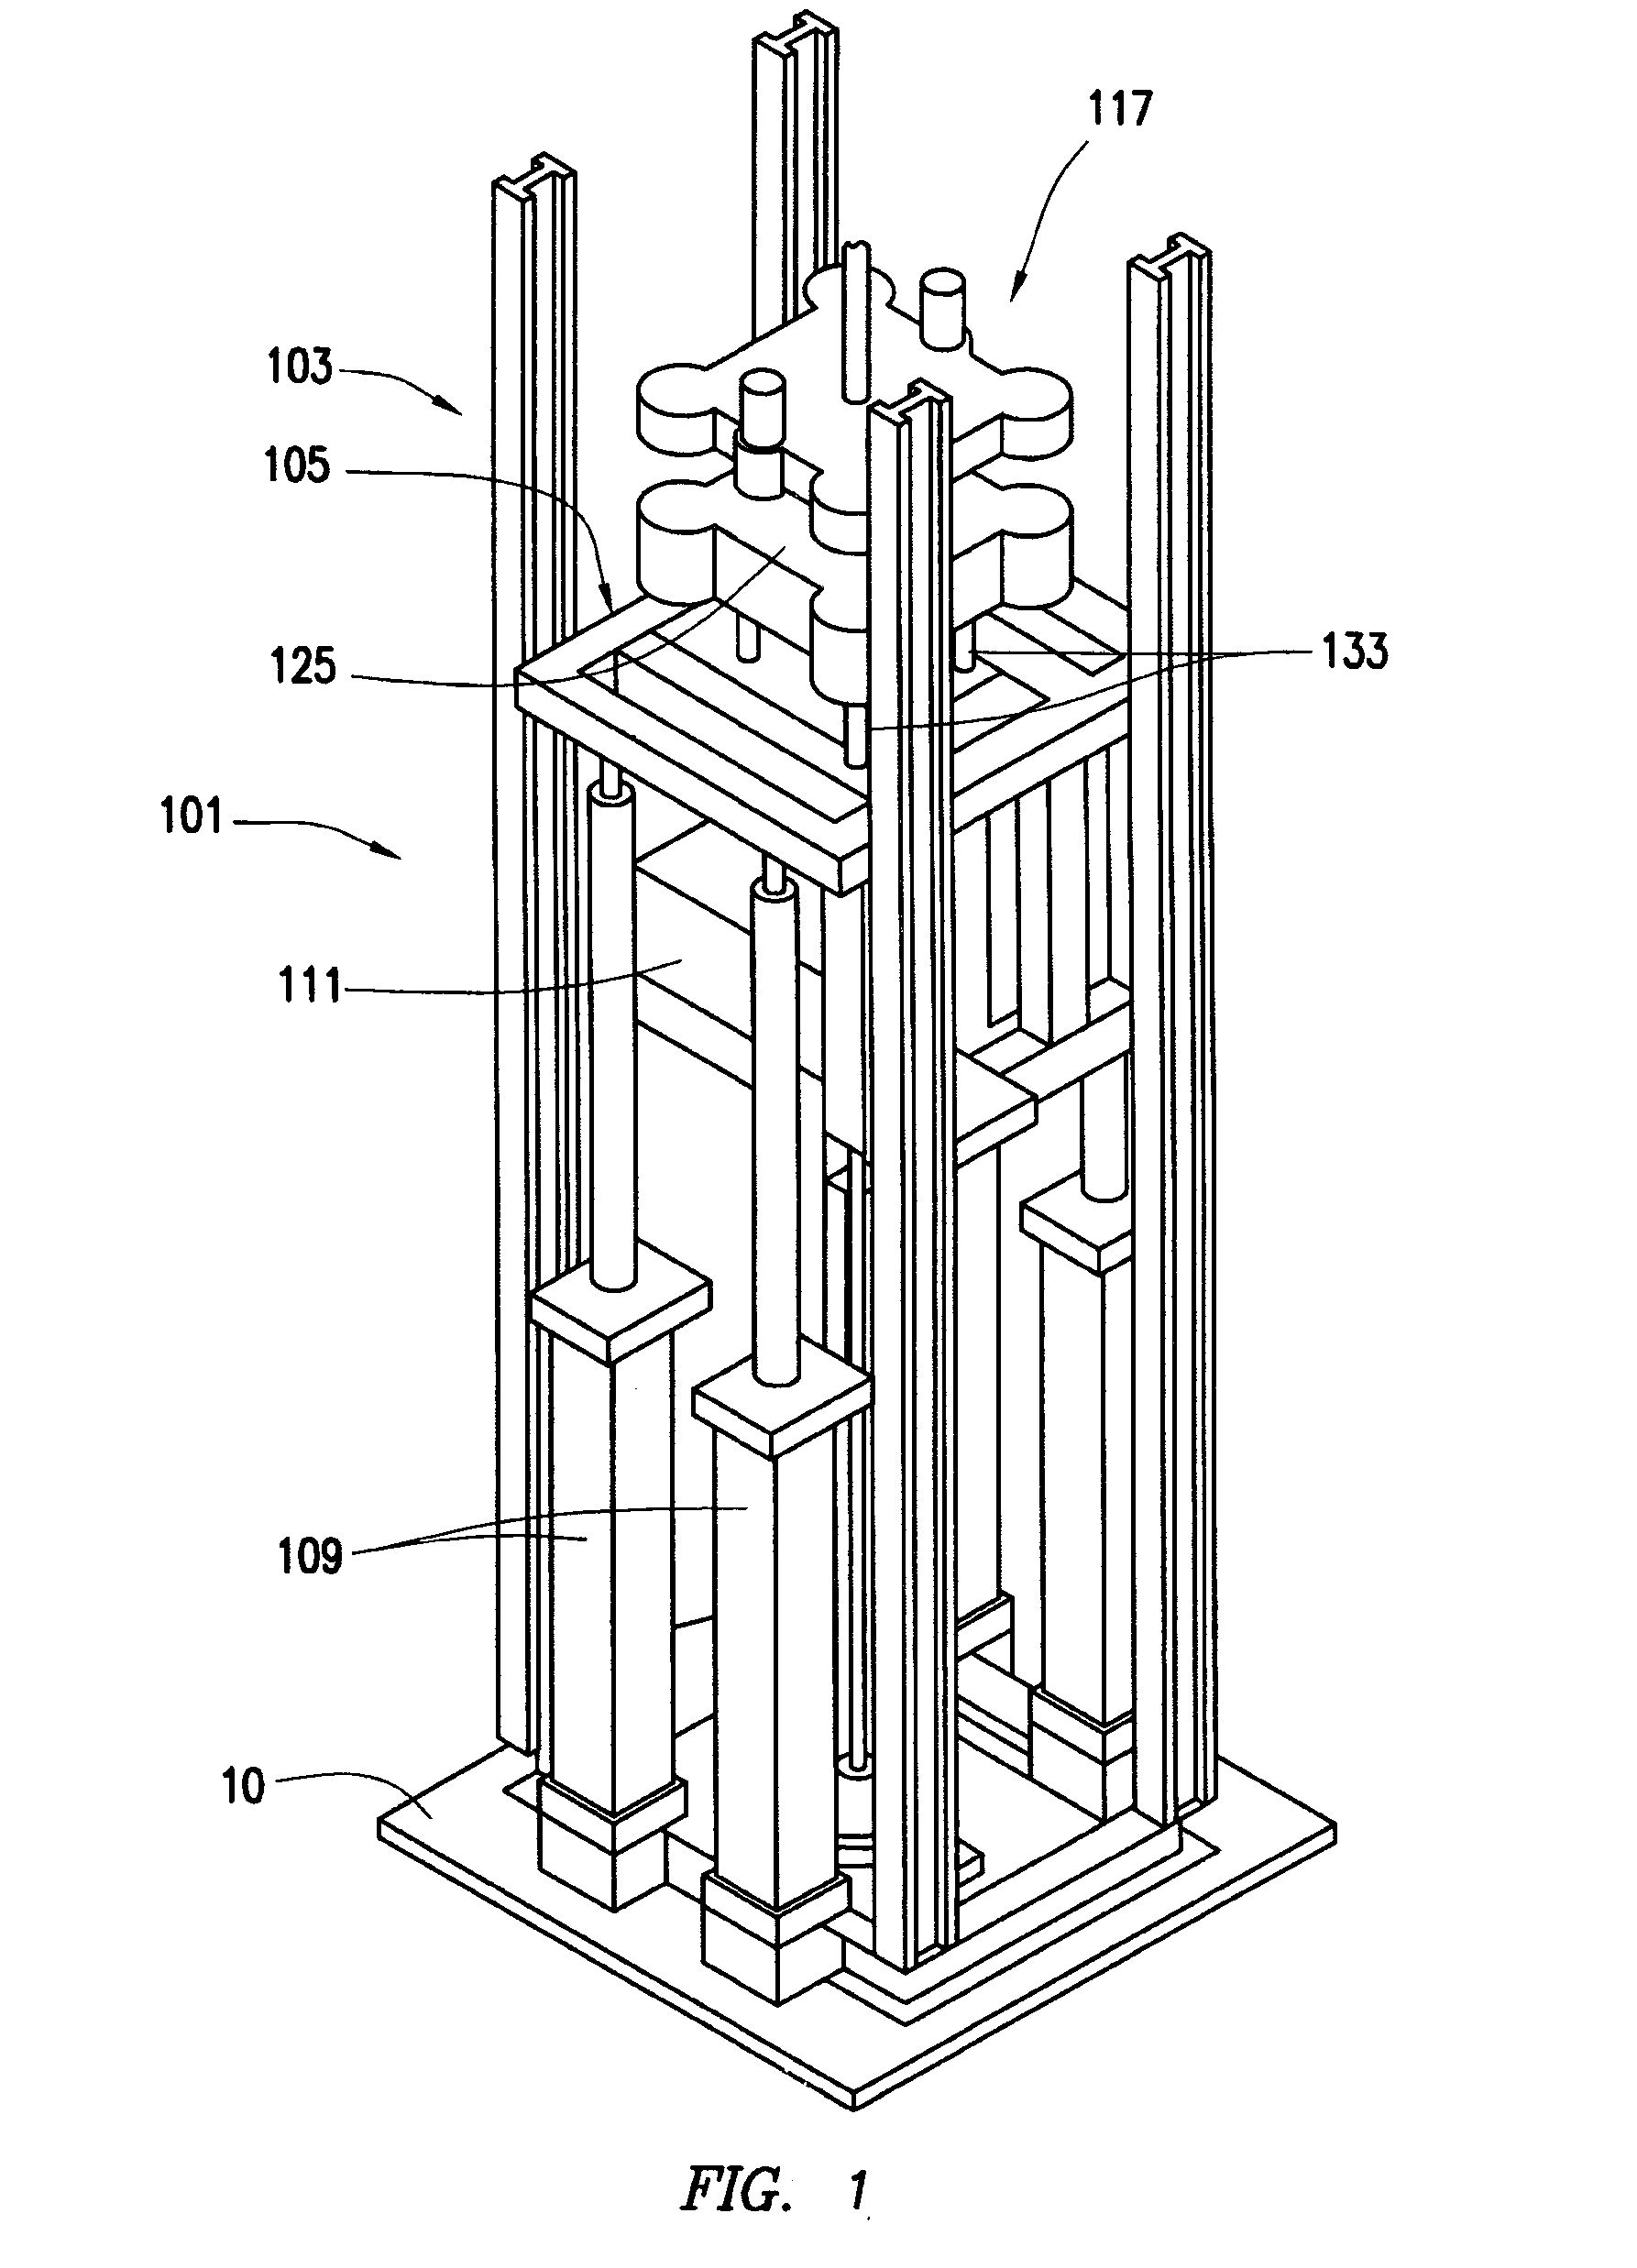 Automated pipe tripping apparatus and methods